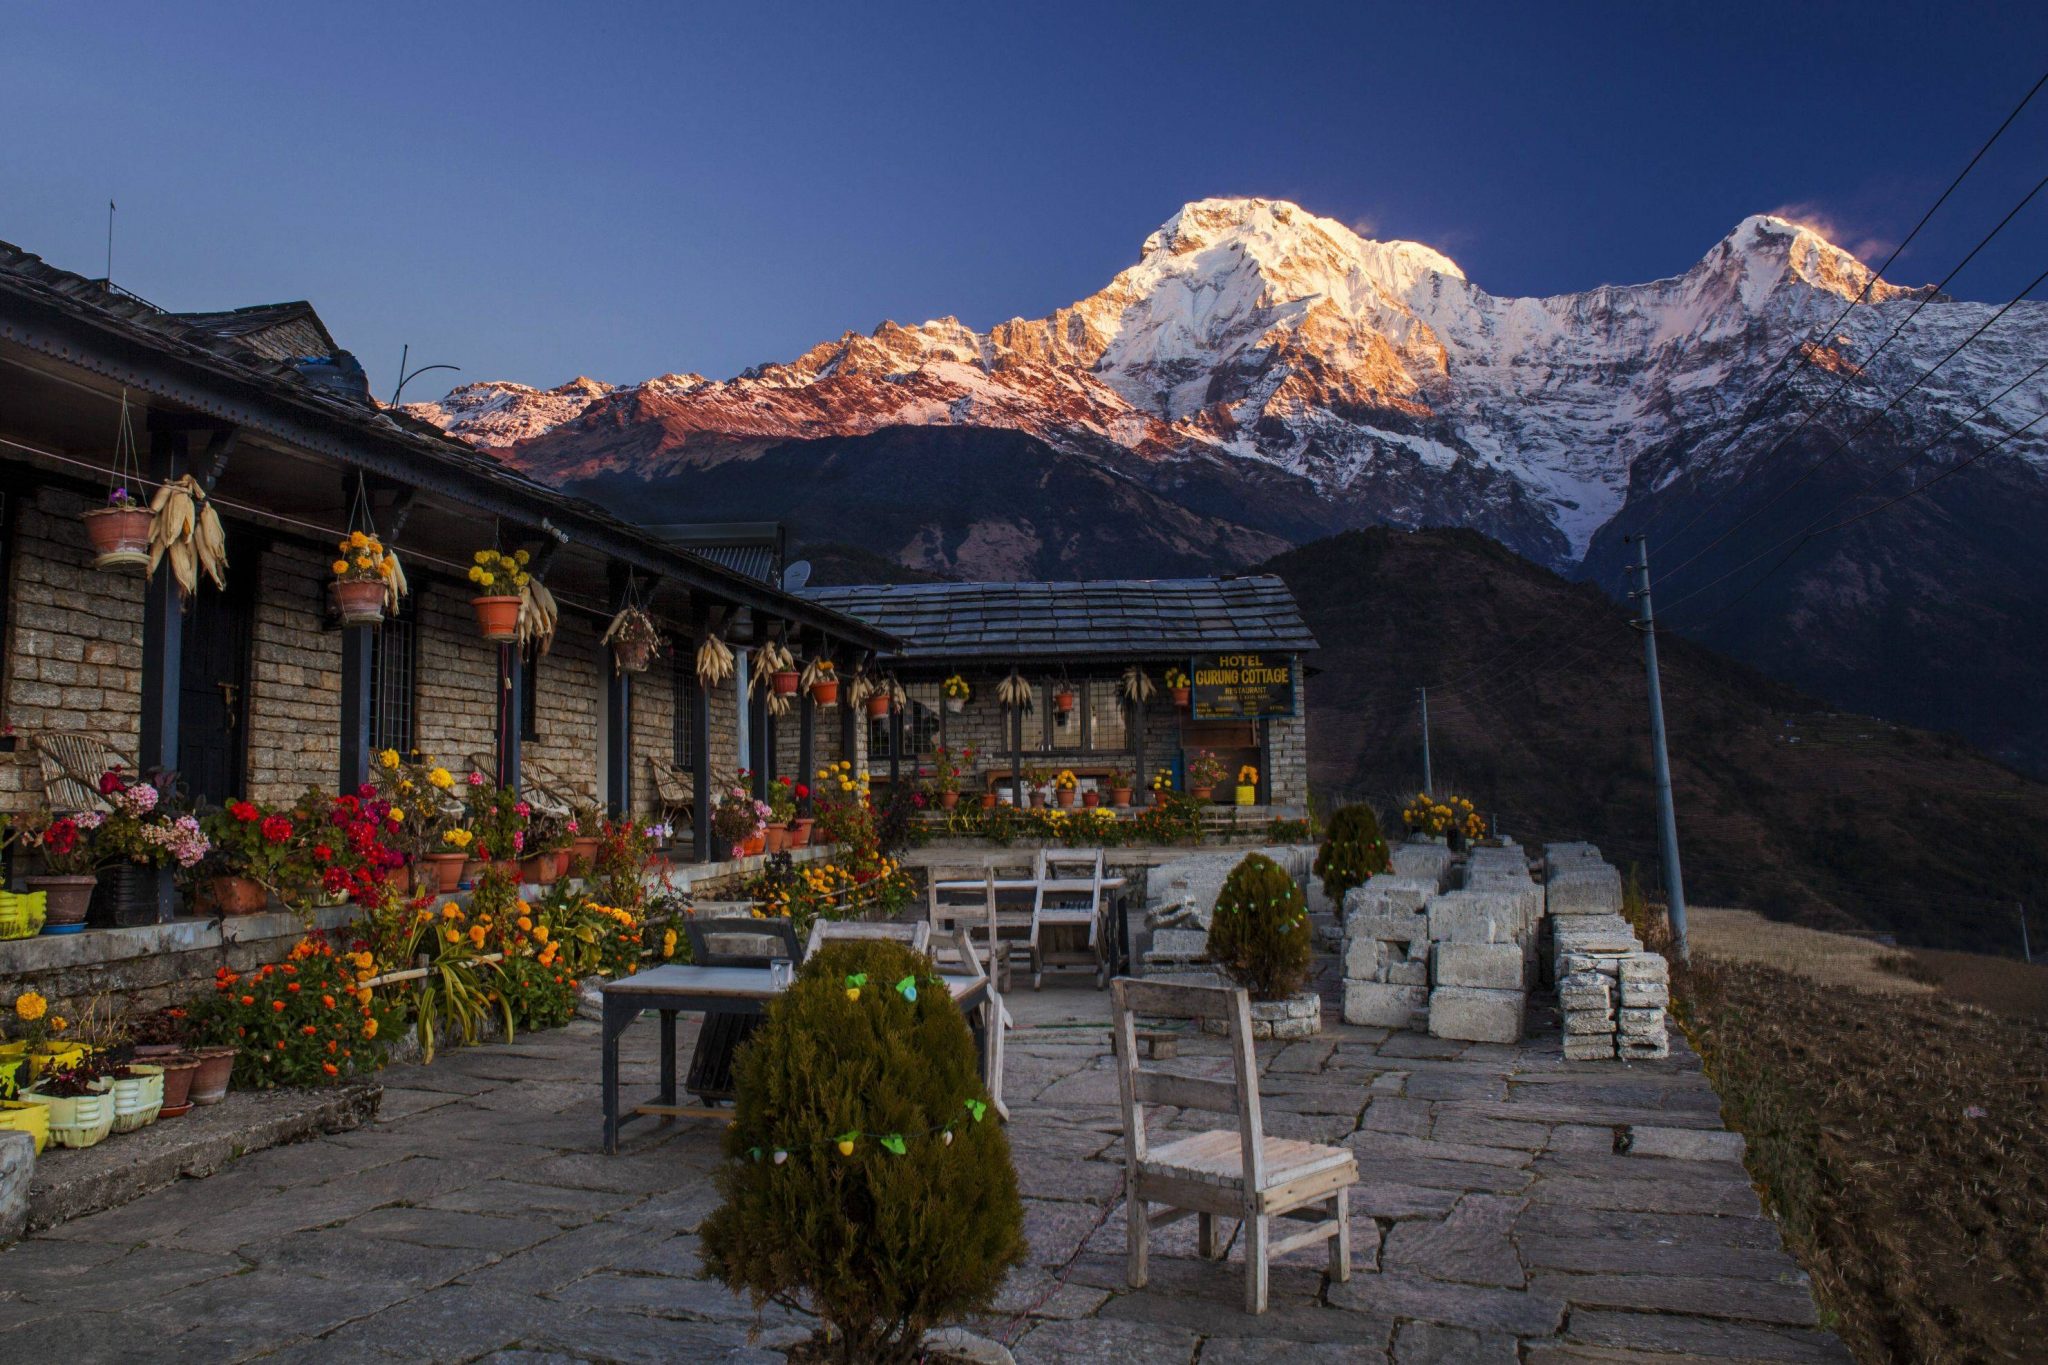 Drive to Nayapul and trek to Ghandruk (1940m/6360 ft), 1 hr drive and 5-6 hrs walk